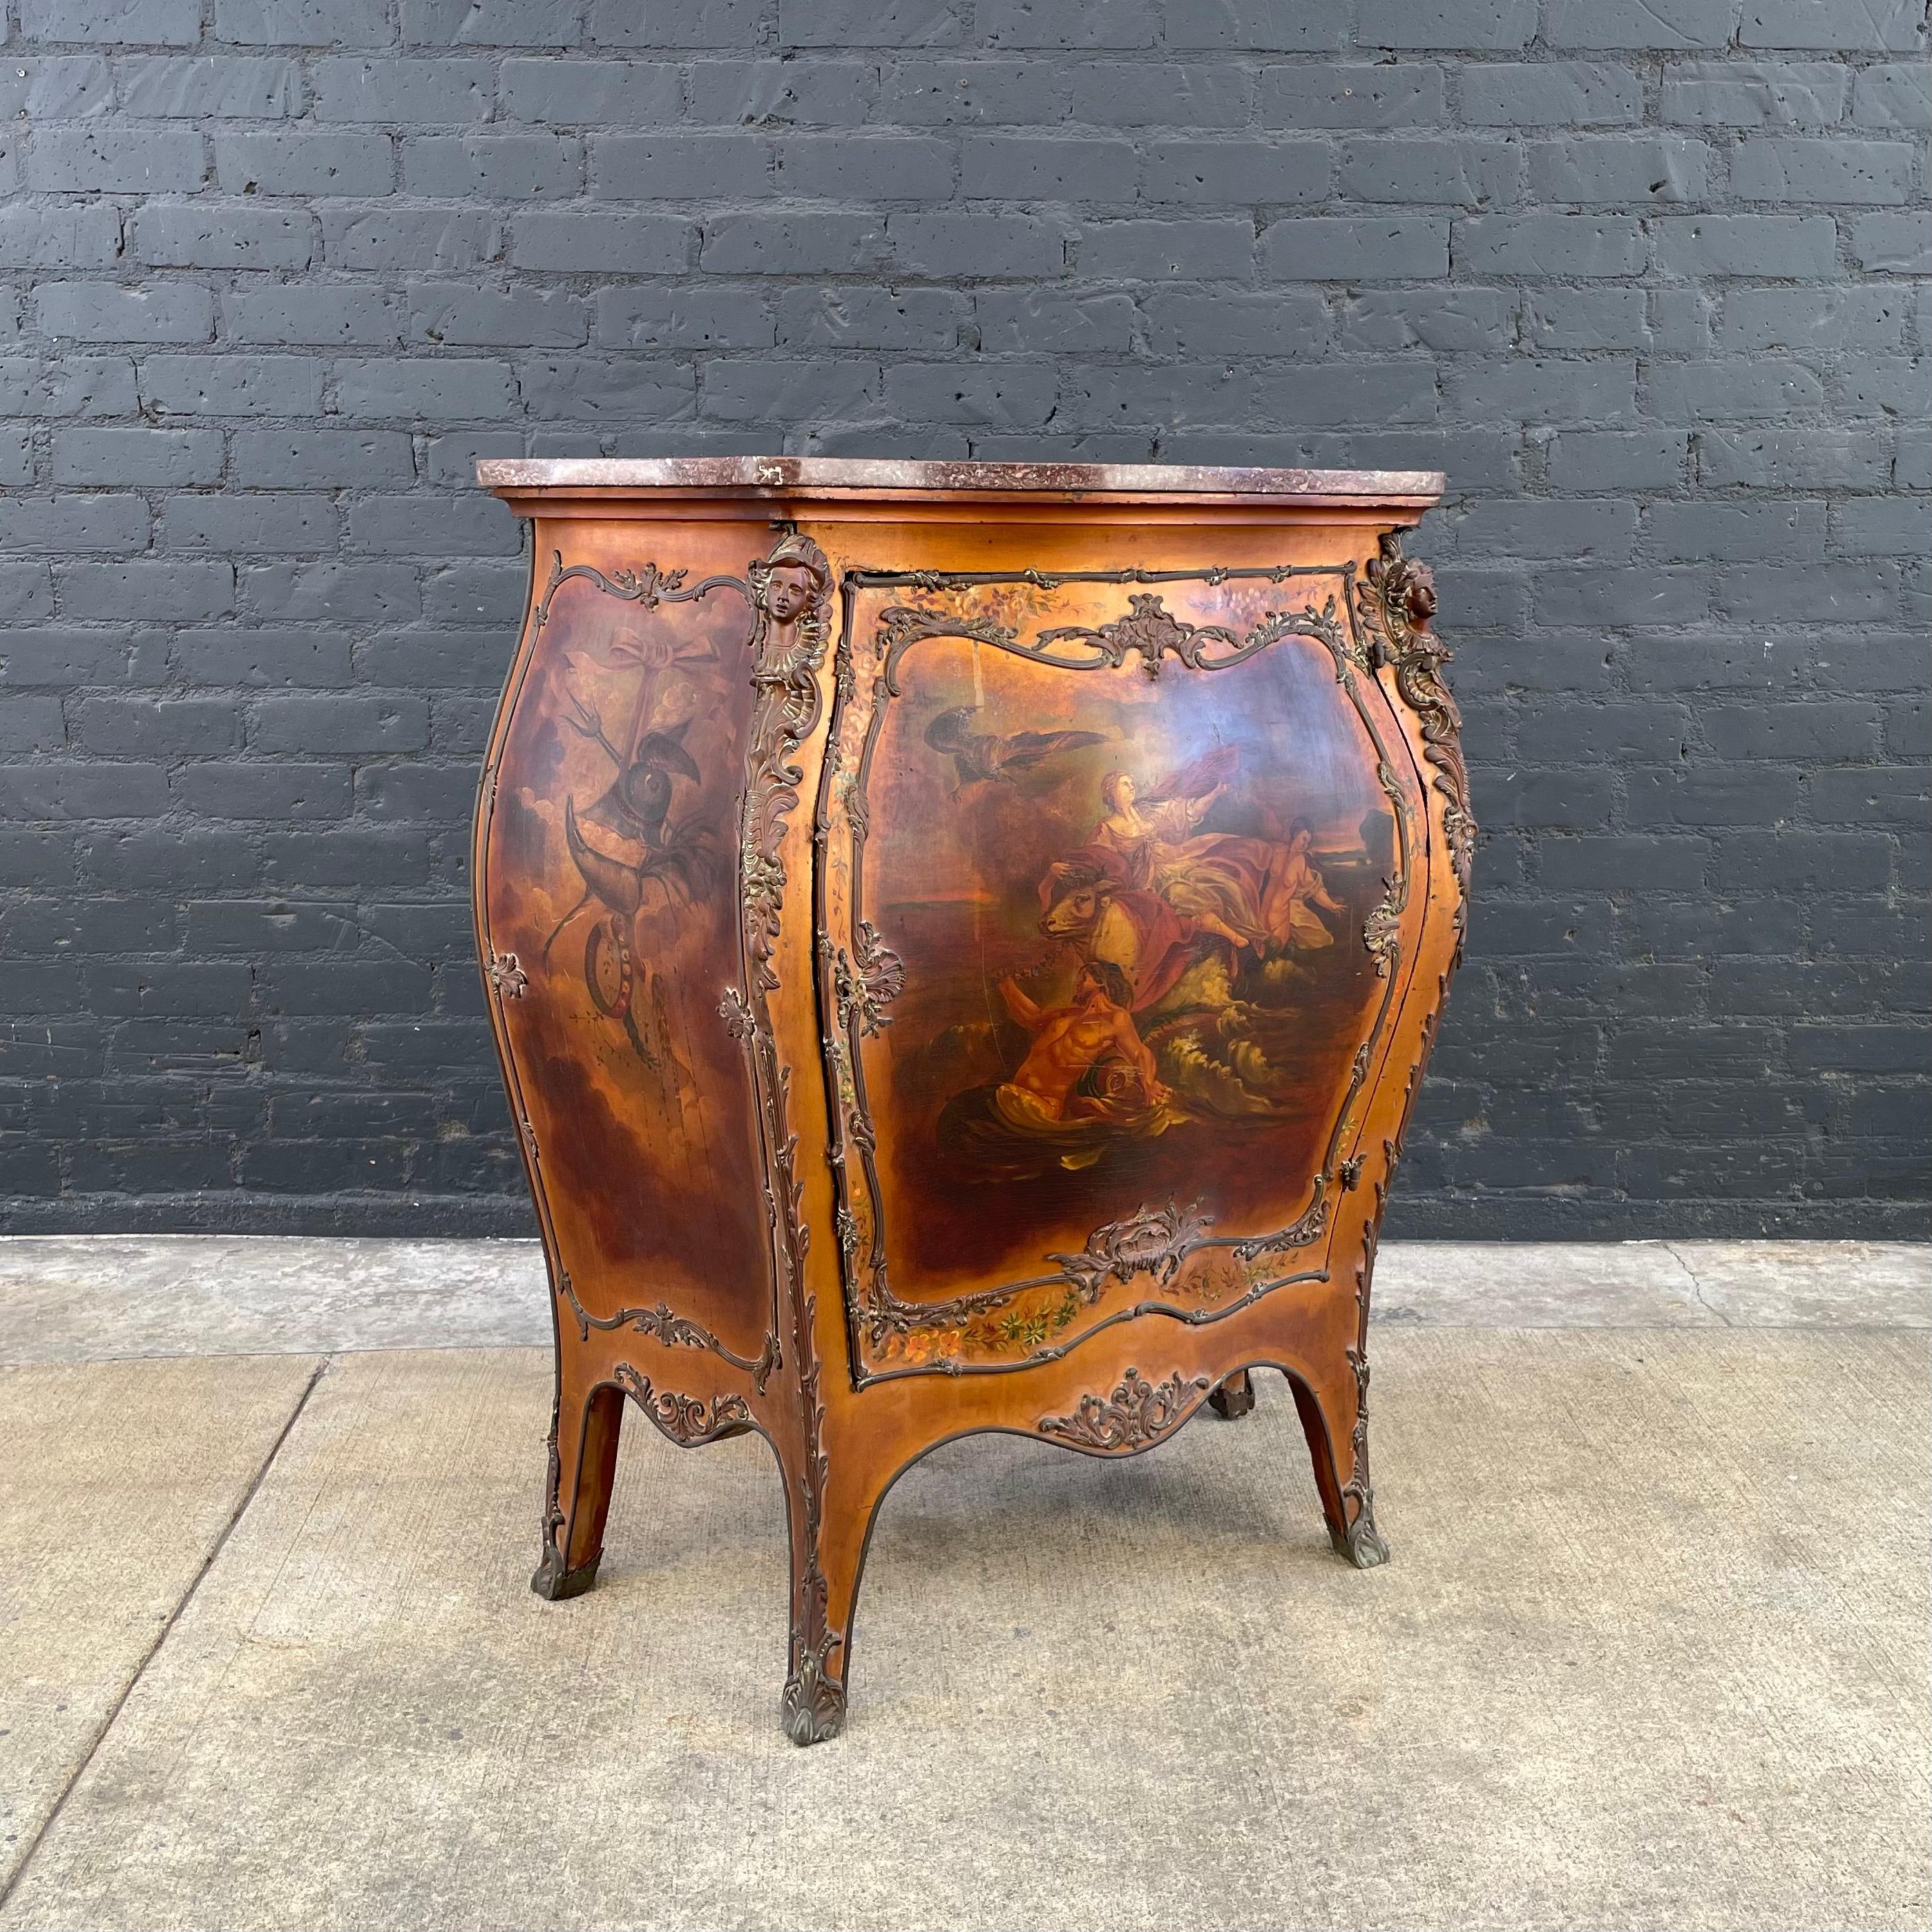 Beautiful, late 19th century French Bombay chest in the Louis XV style.

The chest features superbly hand painted depictions and bronze ormolu decorations. Marble top and original key are included. 

The chest shows age appropriate patina and